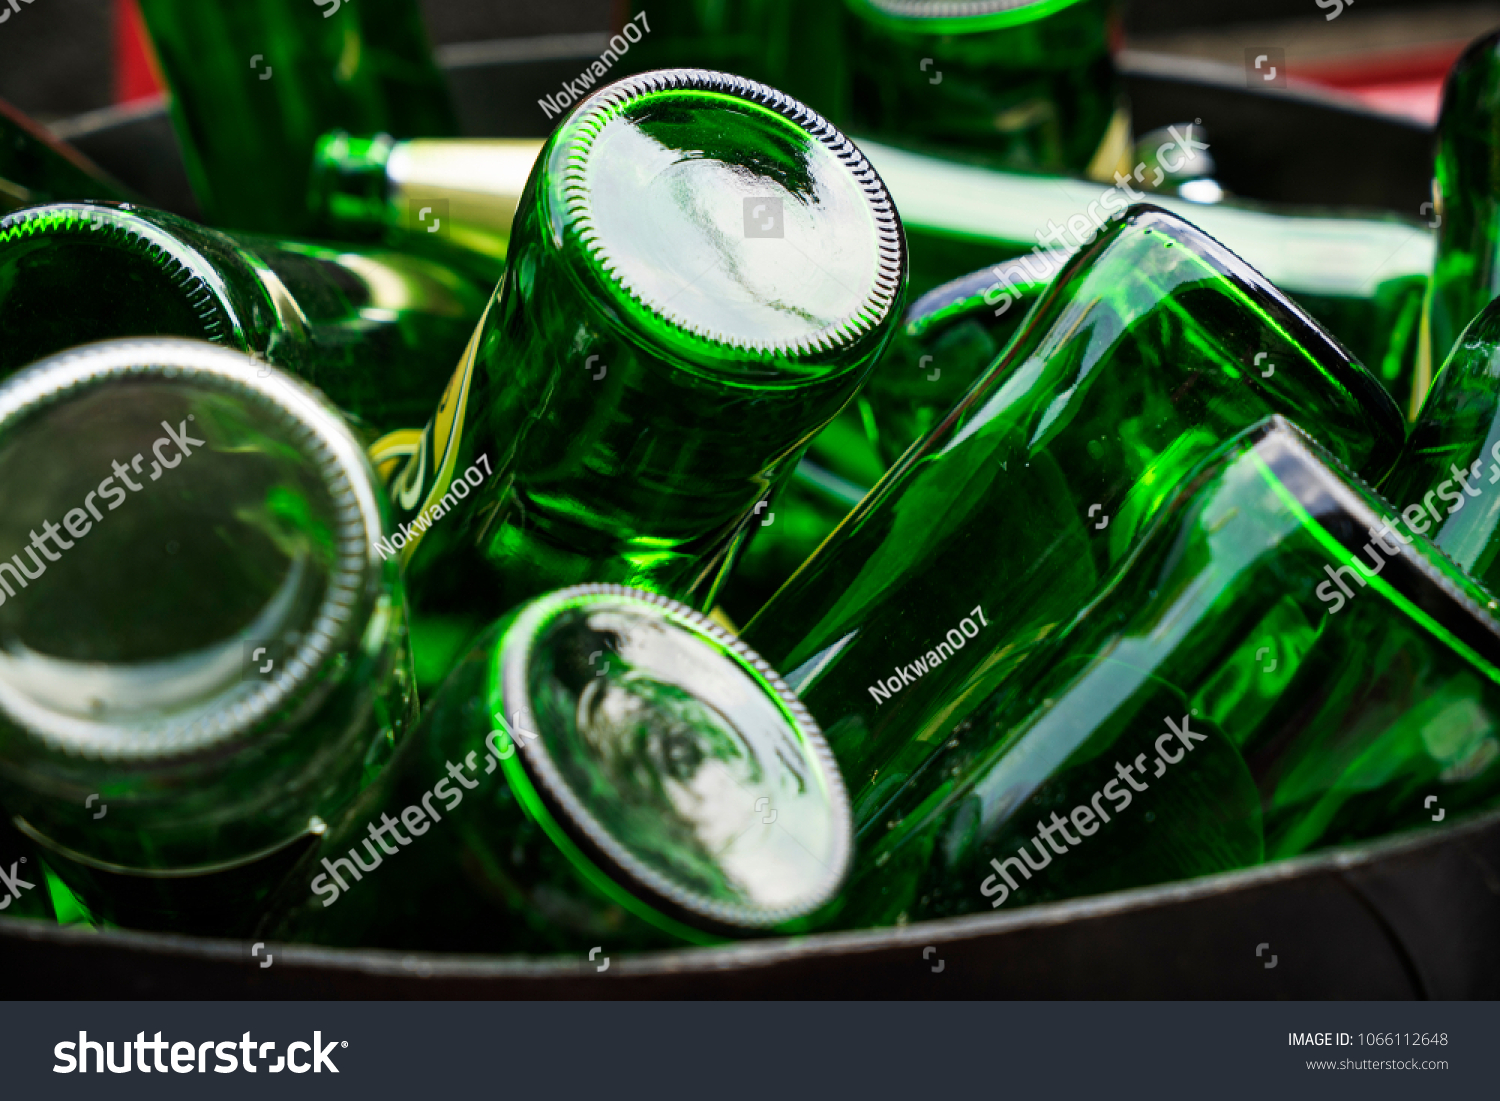 Pile of empty beer, green glass bottles, invert bottom up collected in steel bin for recycle selling. Container industry or waste management concept. #1066112648